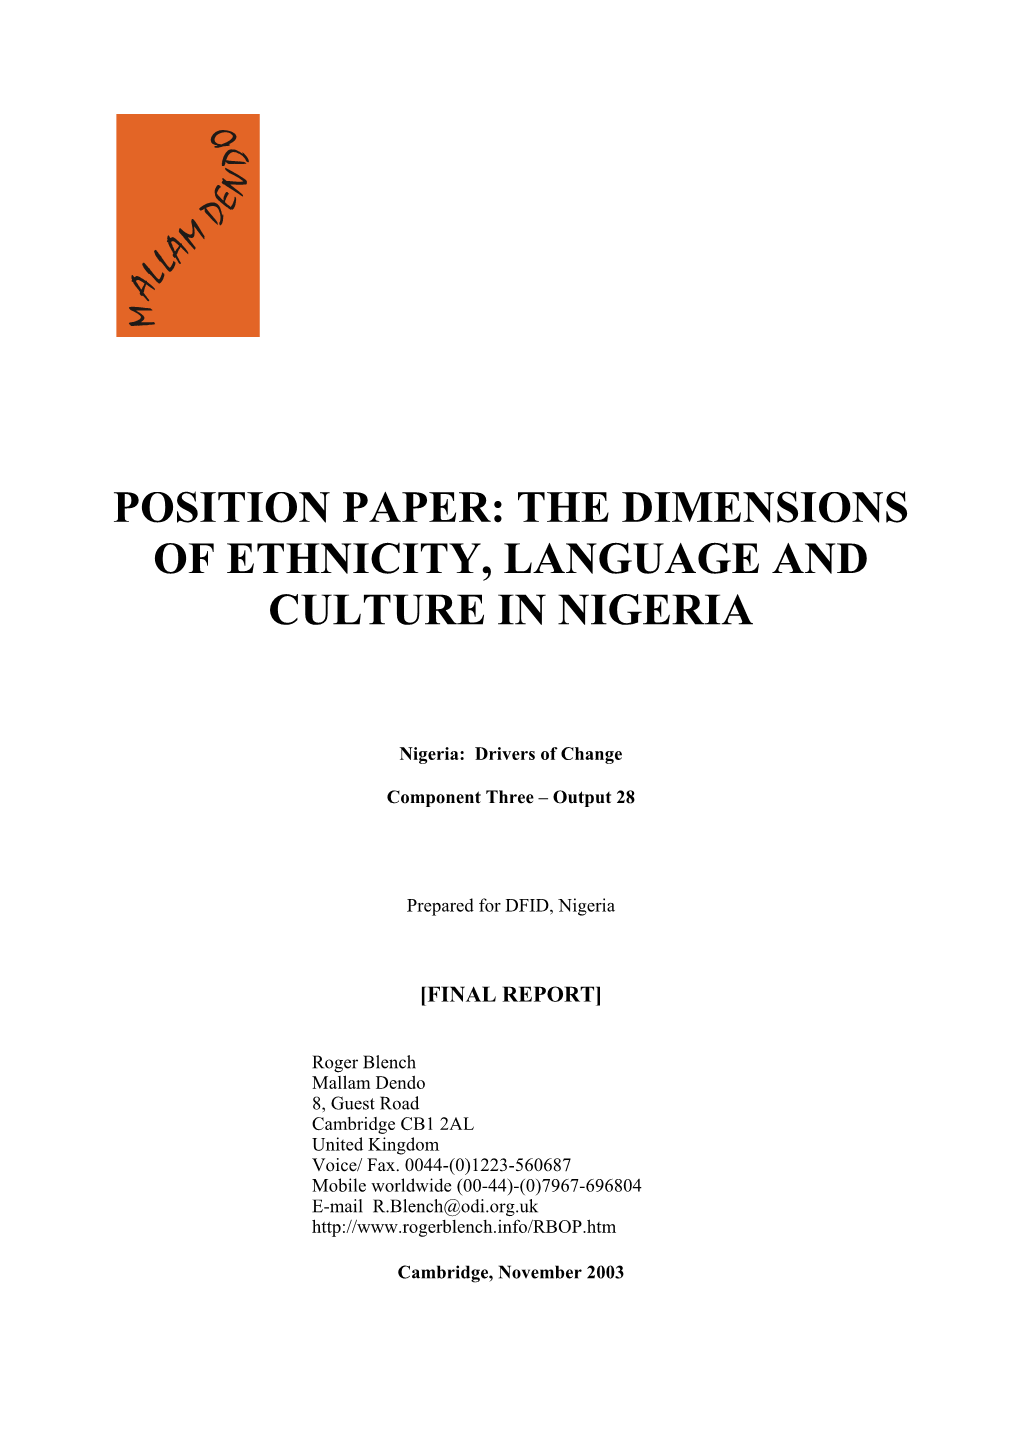 Position Paper: the Dimensions of Ethnicity, Language and Culture in Nigeria